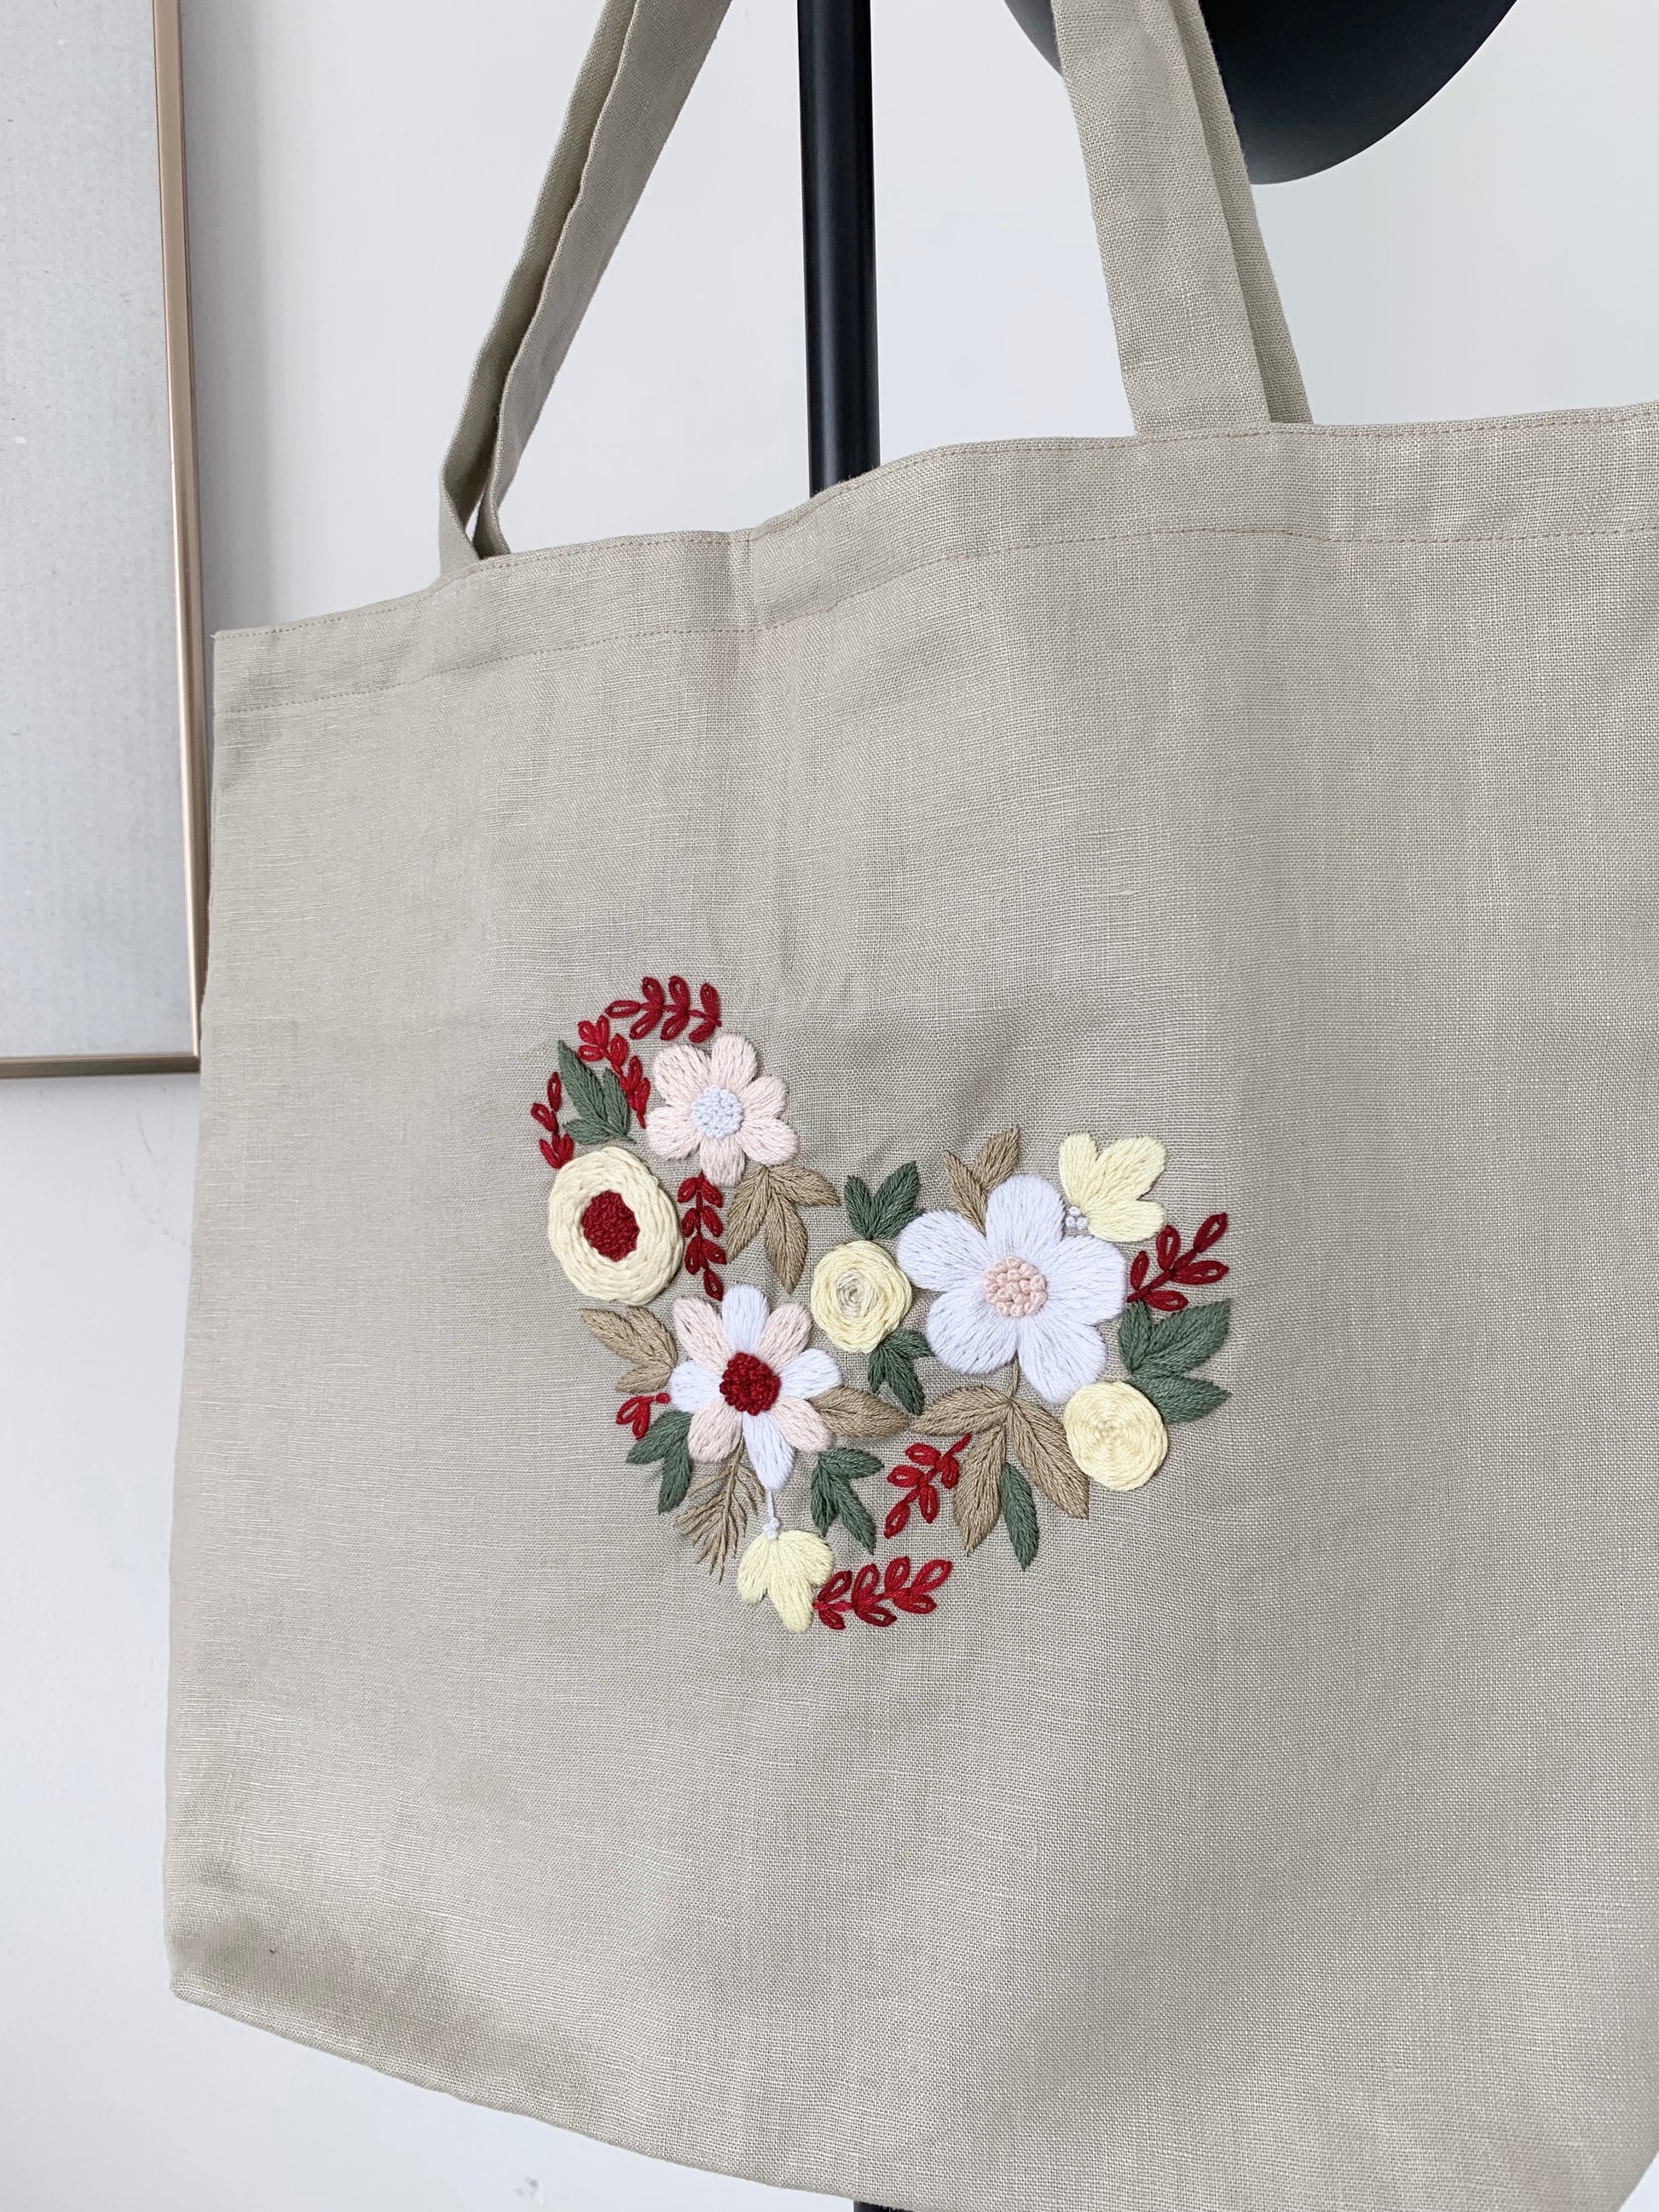 Hand Embroidered Tote Bag